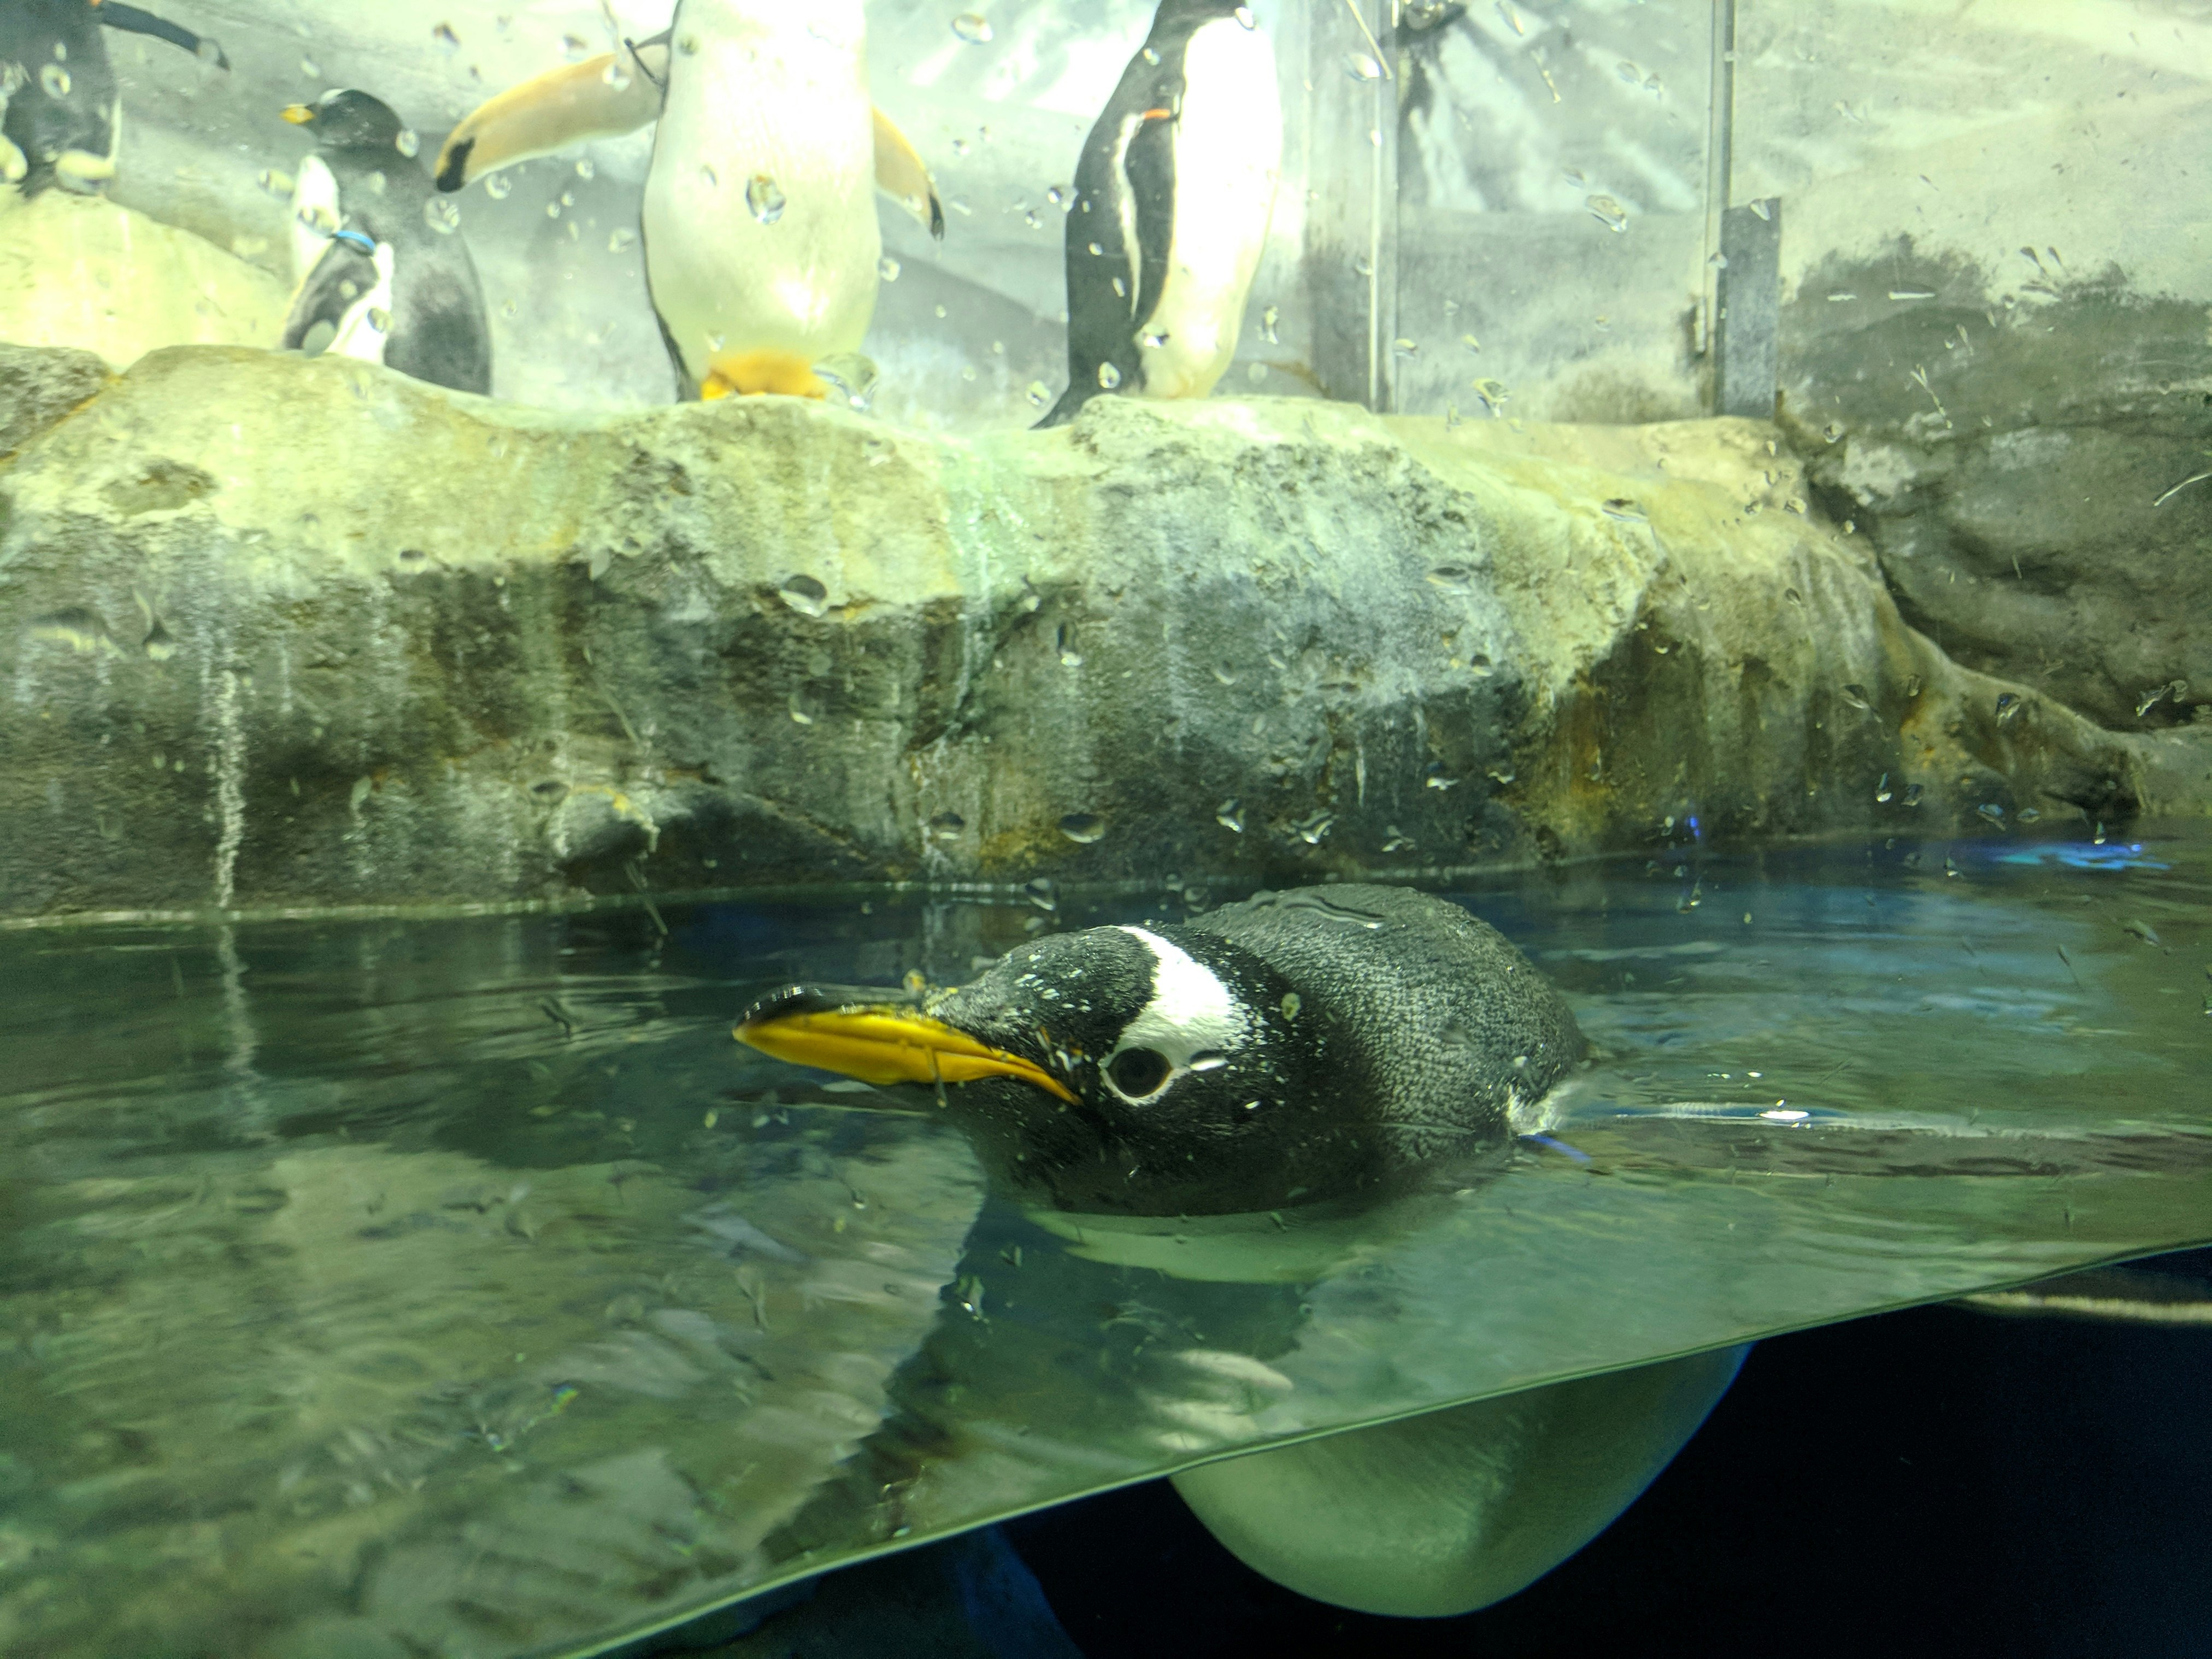 A penguin looks at the viewer through the glass walls of a habitat at the Tennessee Aquarium in Chattanooga, Tennessee